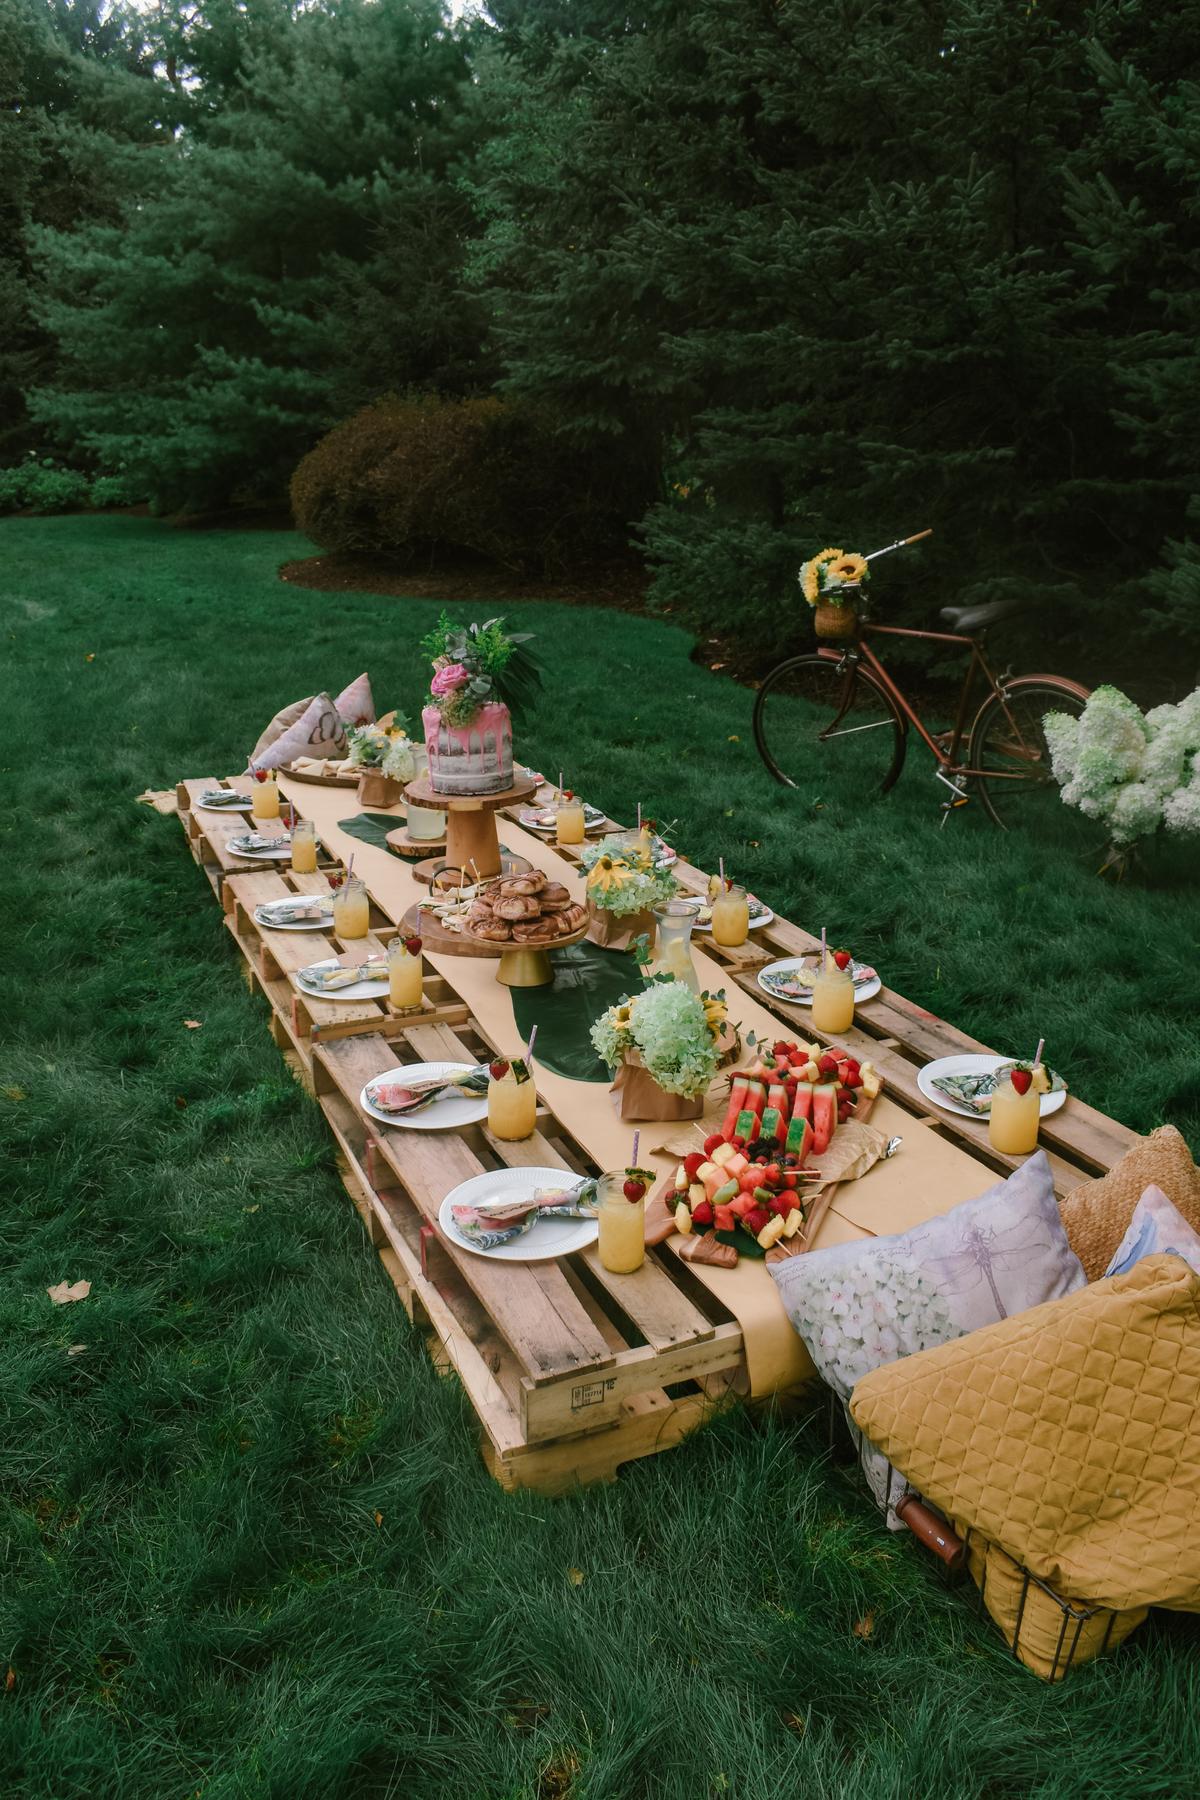 Use an assortment of foods to “decorate” the picnic table, making your al fresco meal memorable and fun.<br/>(Mariah Hewines/Unsplash)